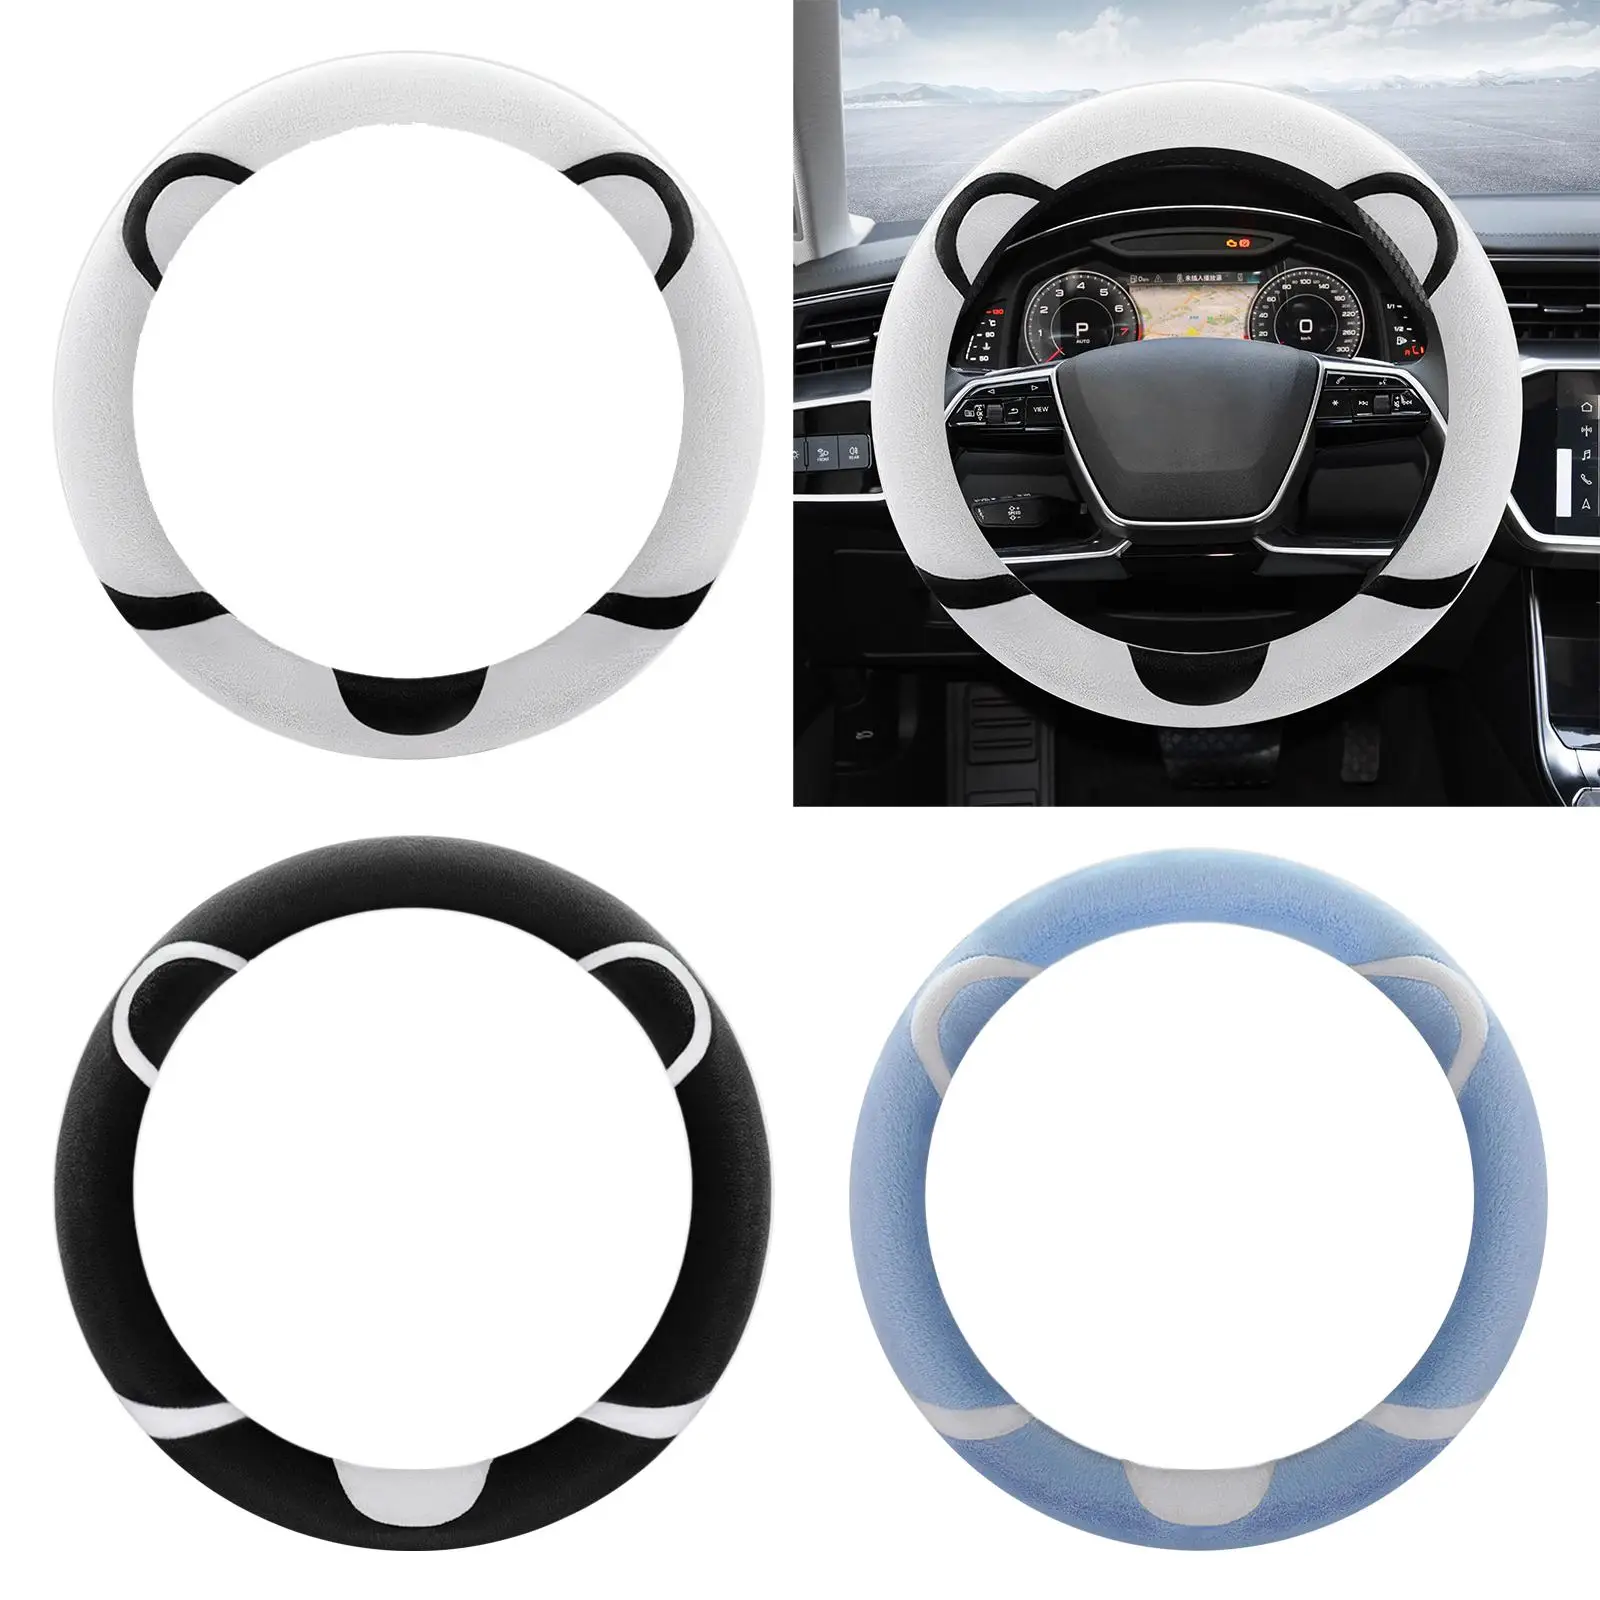 Round Car Steering Wheel Cover Comfortable Auto Accessories Interior Decoration Wear Resistant Sleeve Protection Protector Cover